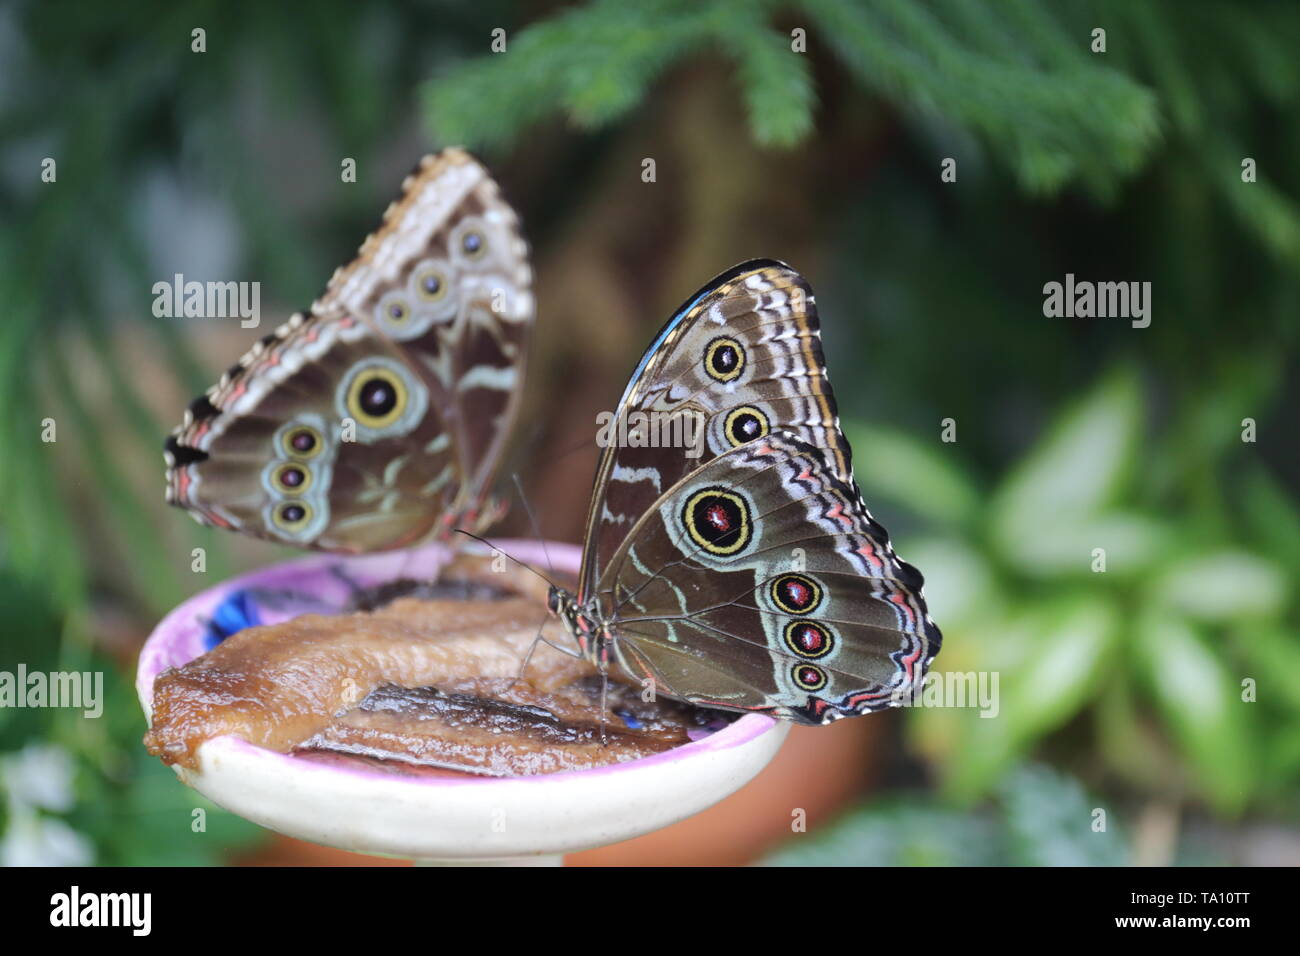 Two morpho butterflies resting on a feed tray turned with eye spots facing camera Stock Photo